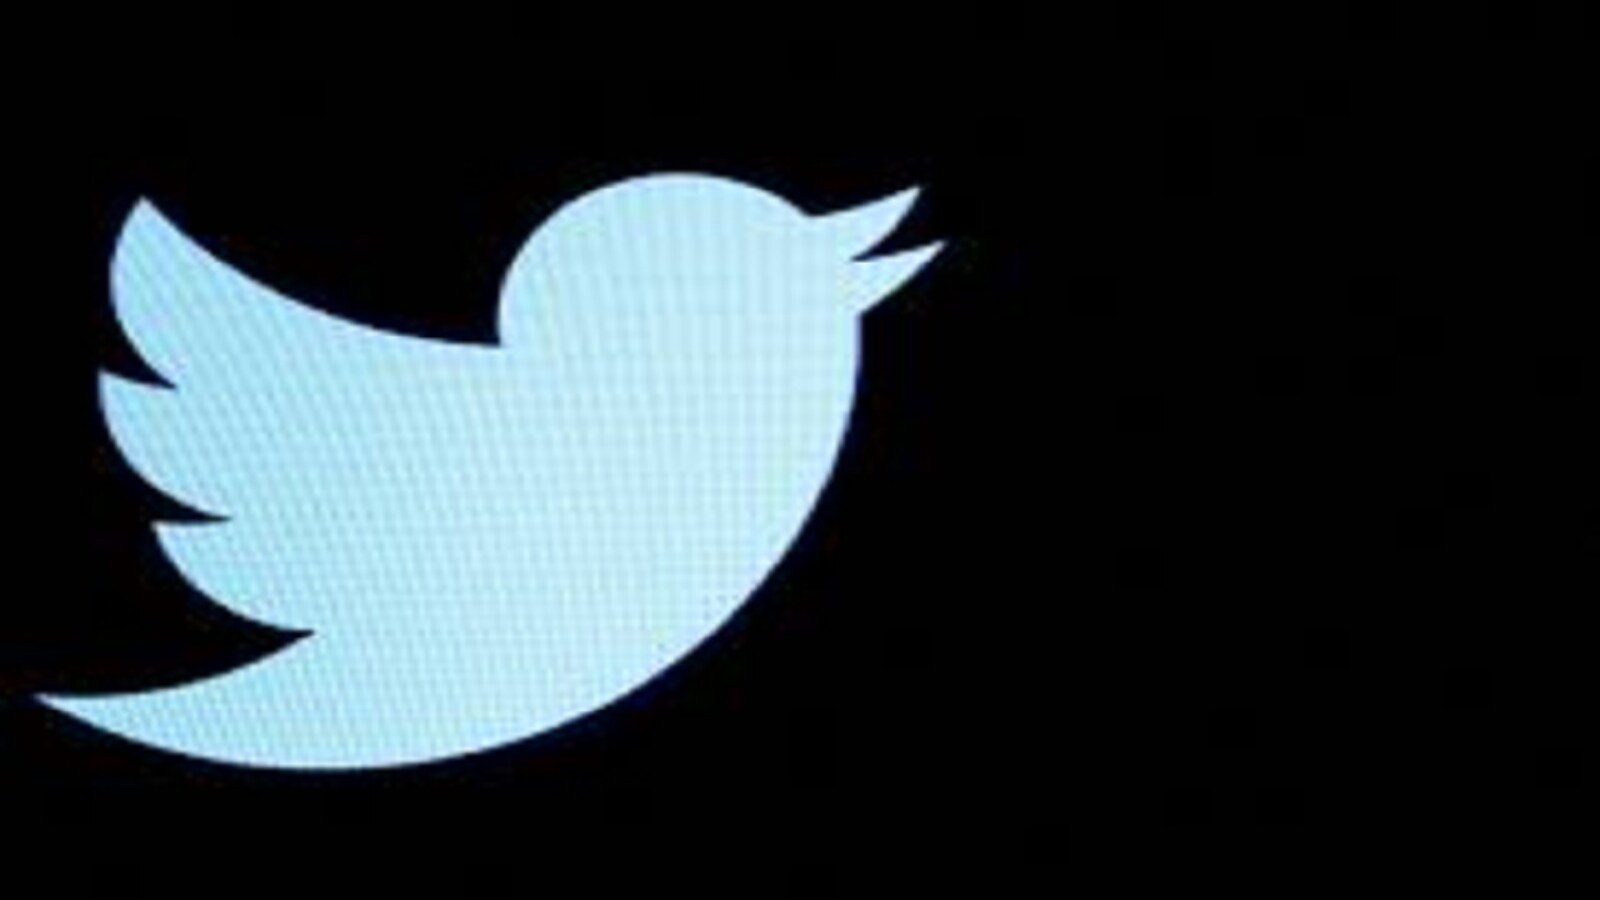 More Twitter officials leave, gutting top management